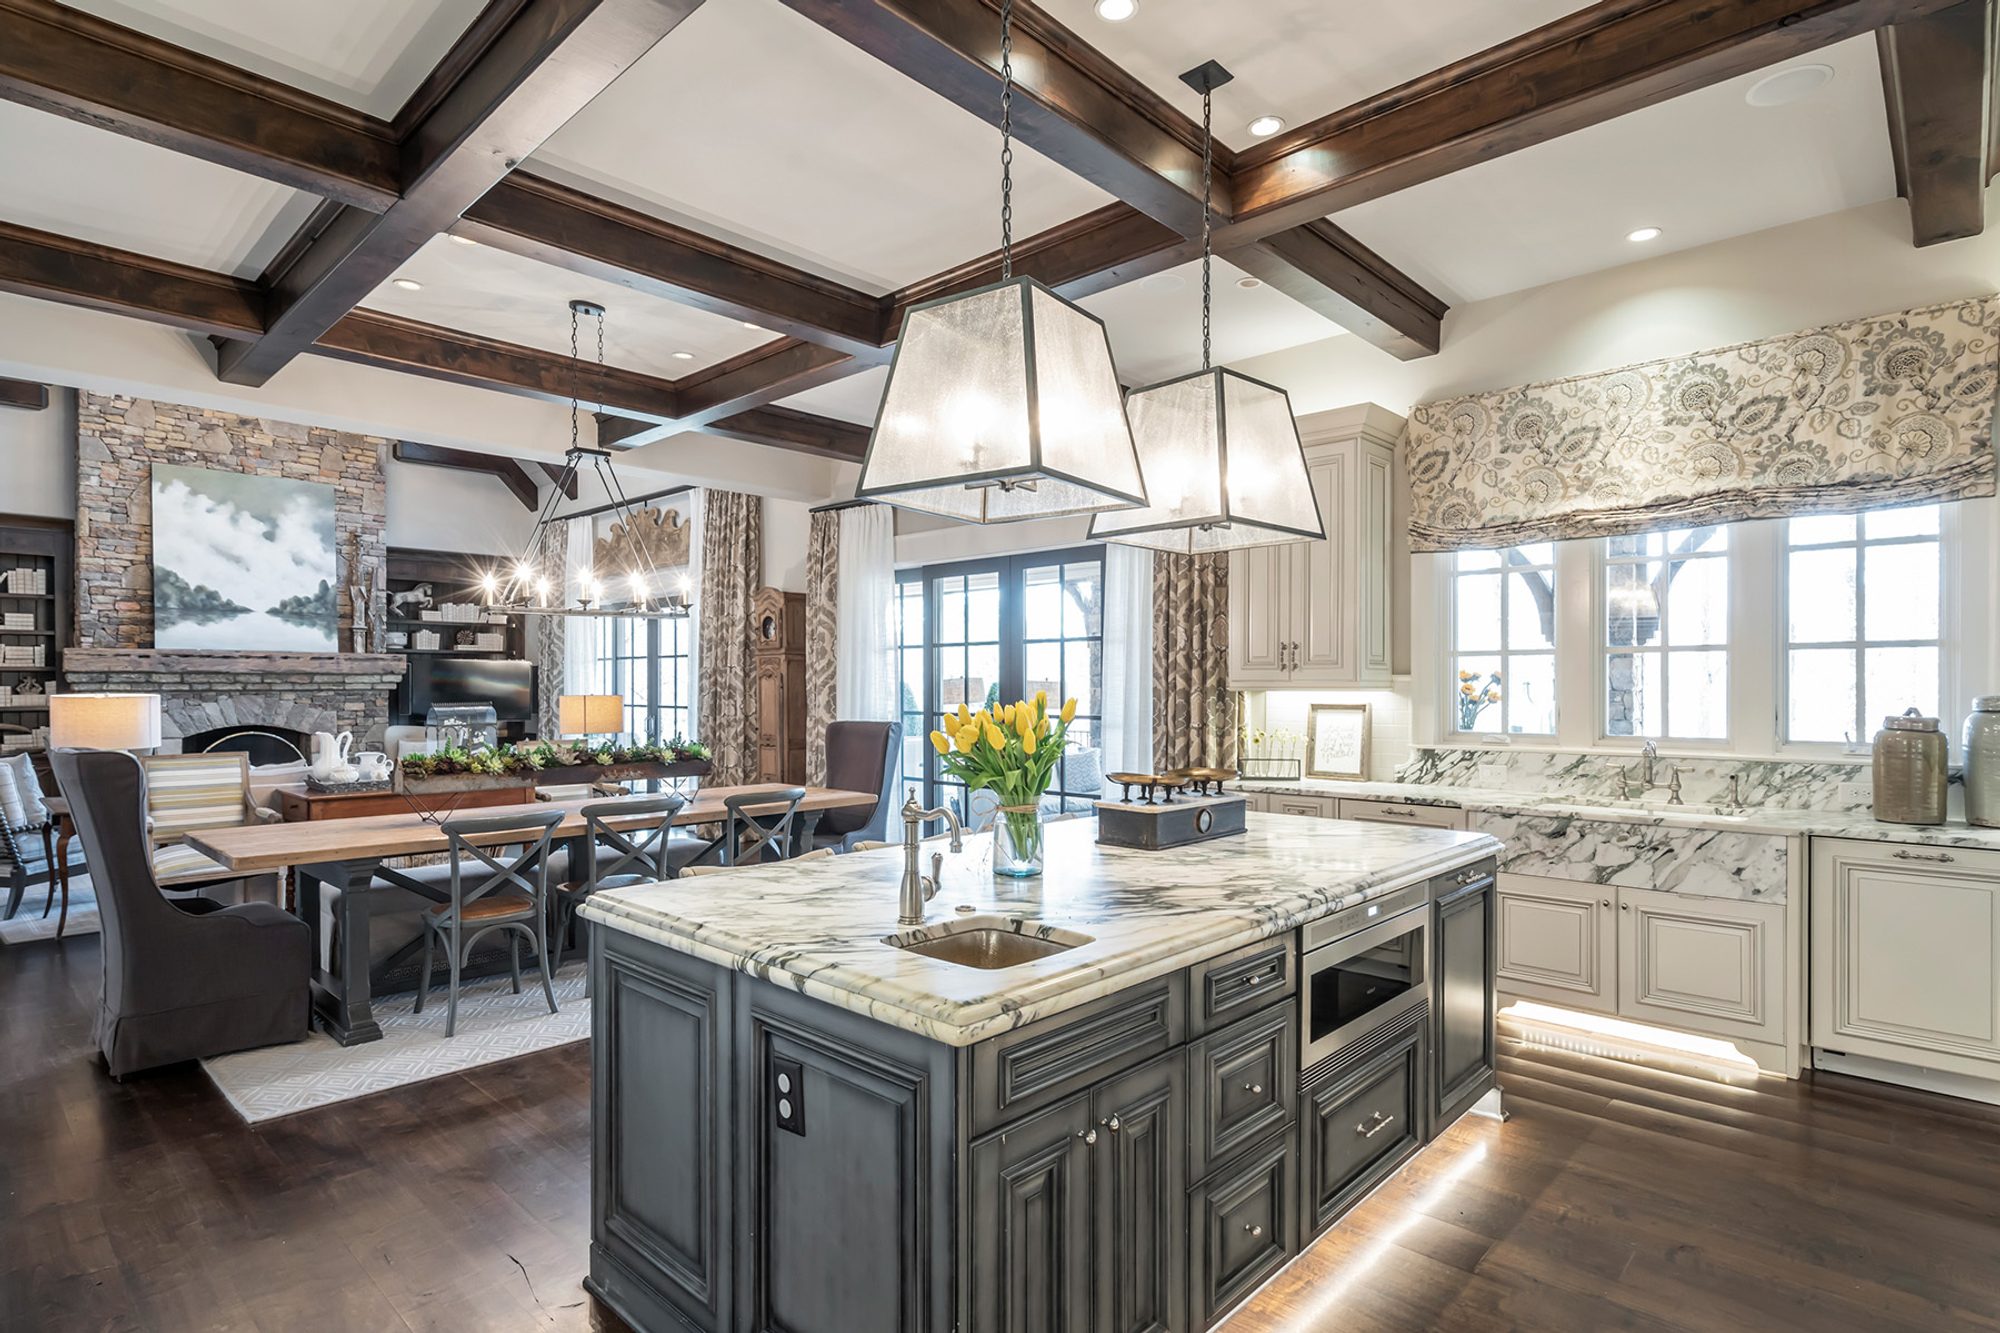 beautiful kitchen gray center island with marble countertop, dark wood stained coffered ceiling. Open floor plan.